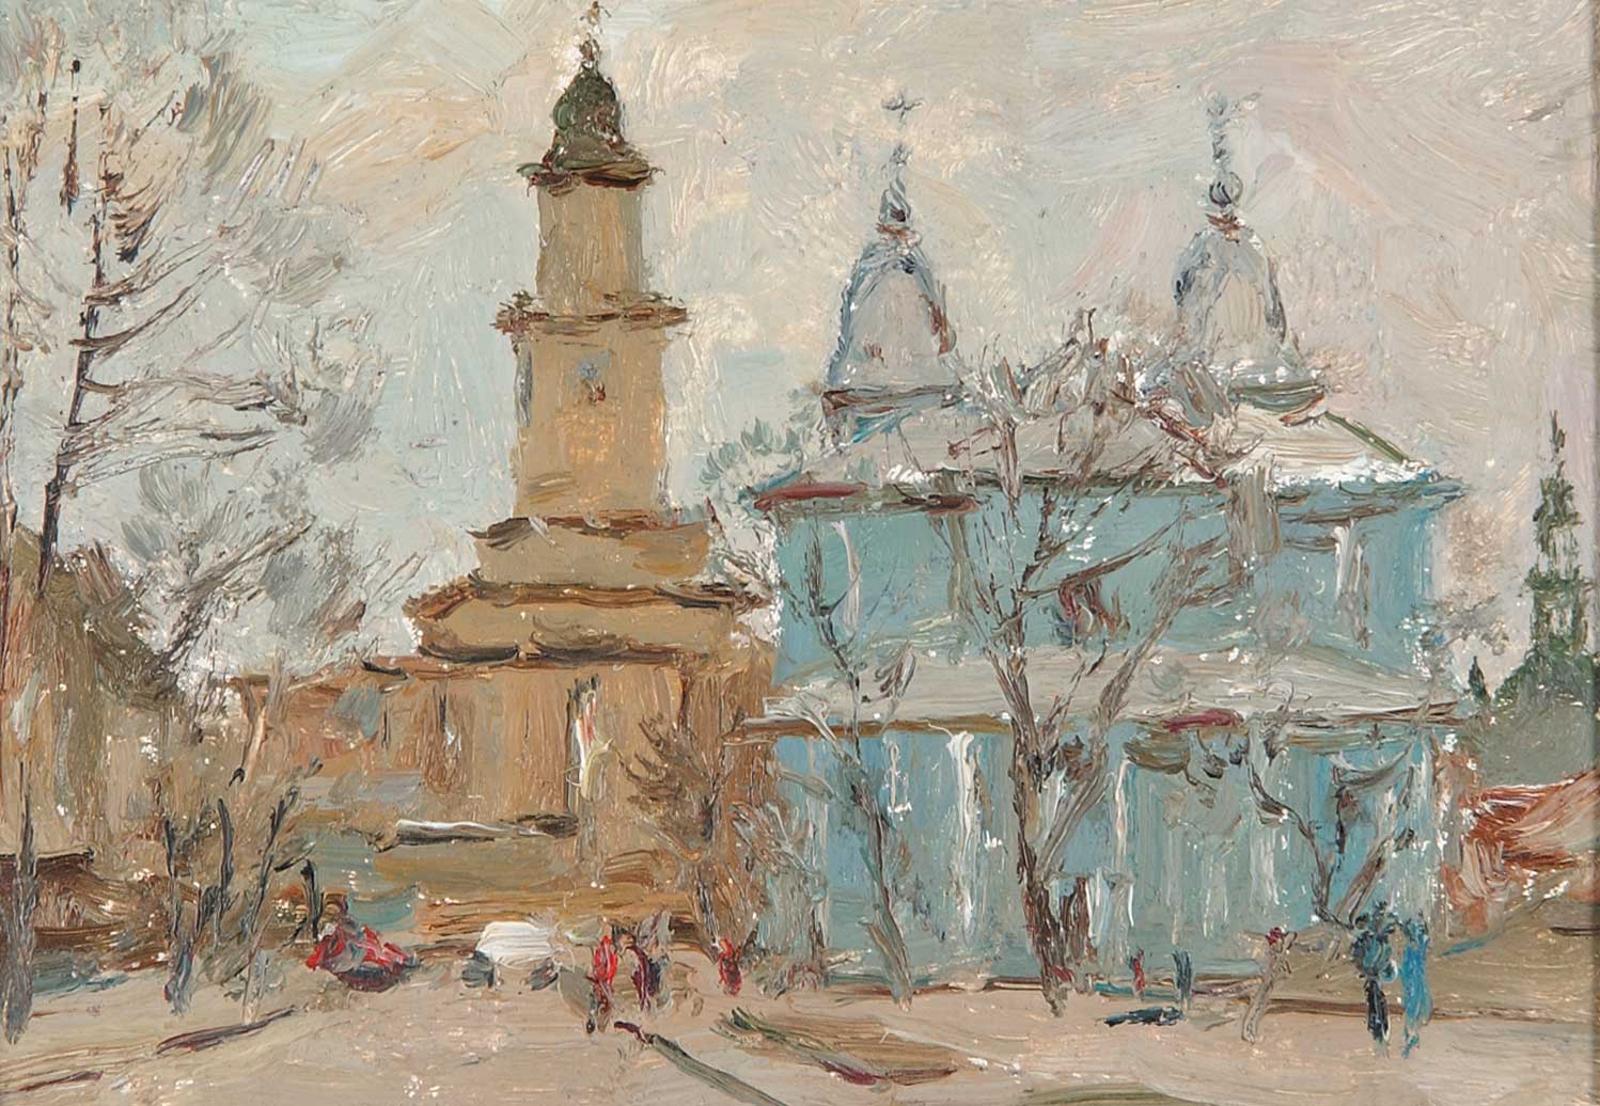 Kiev Andrievsky Sobor - Untitled - Churches on the Bank of the Banks of the Dnipro River, Ukraine